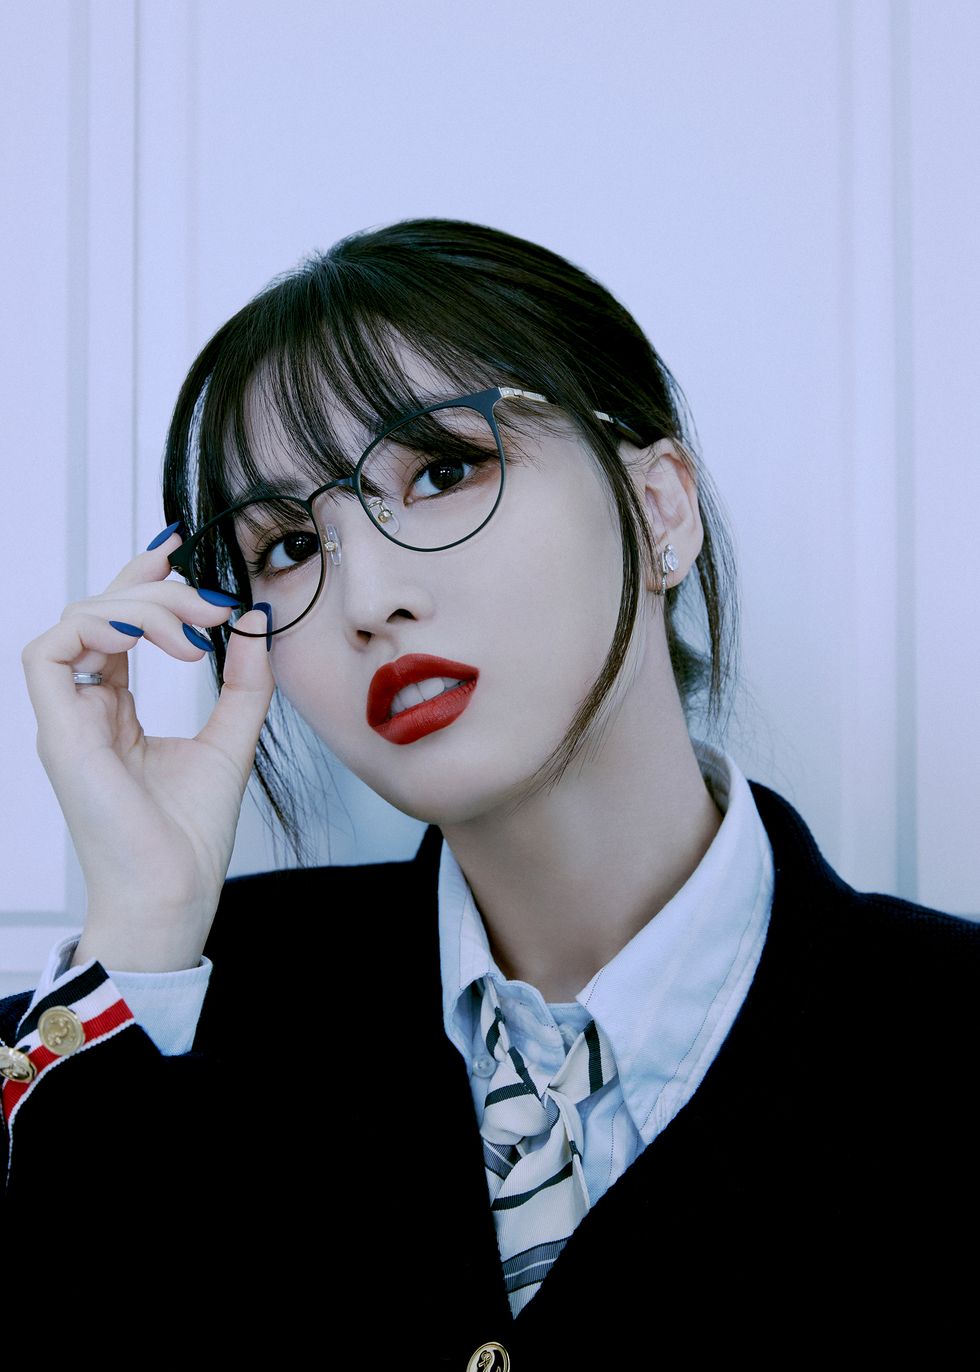 momo in the study visual﻿